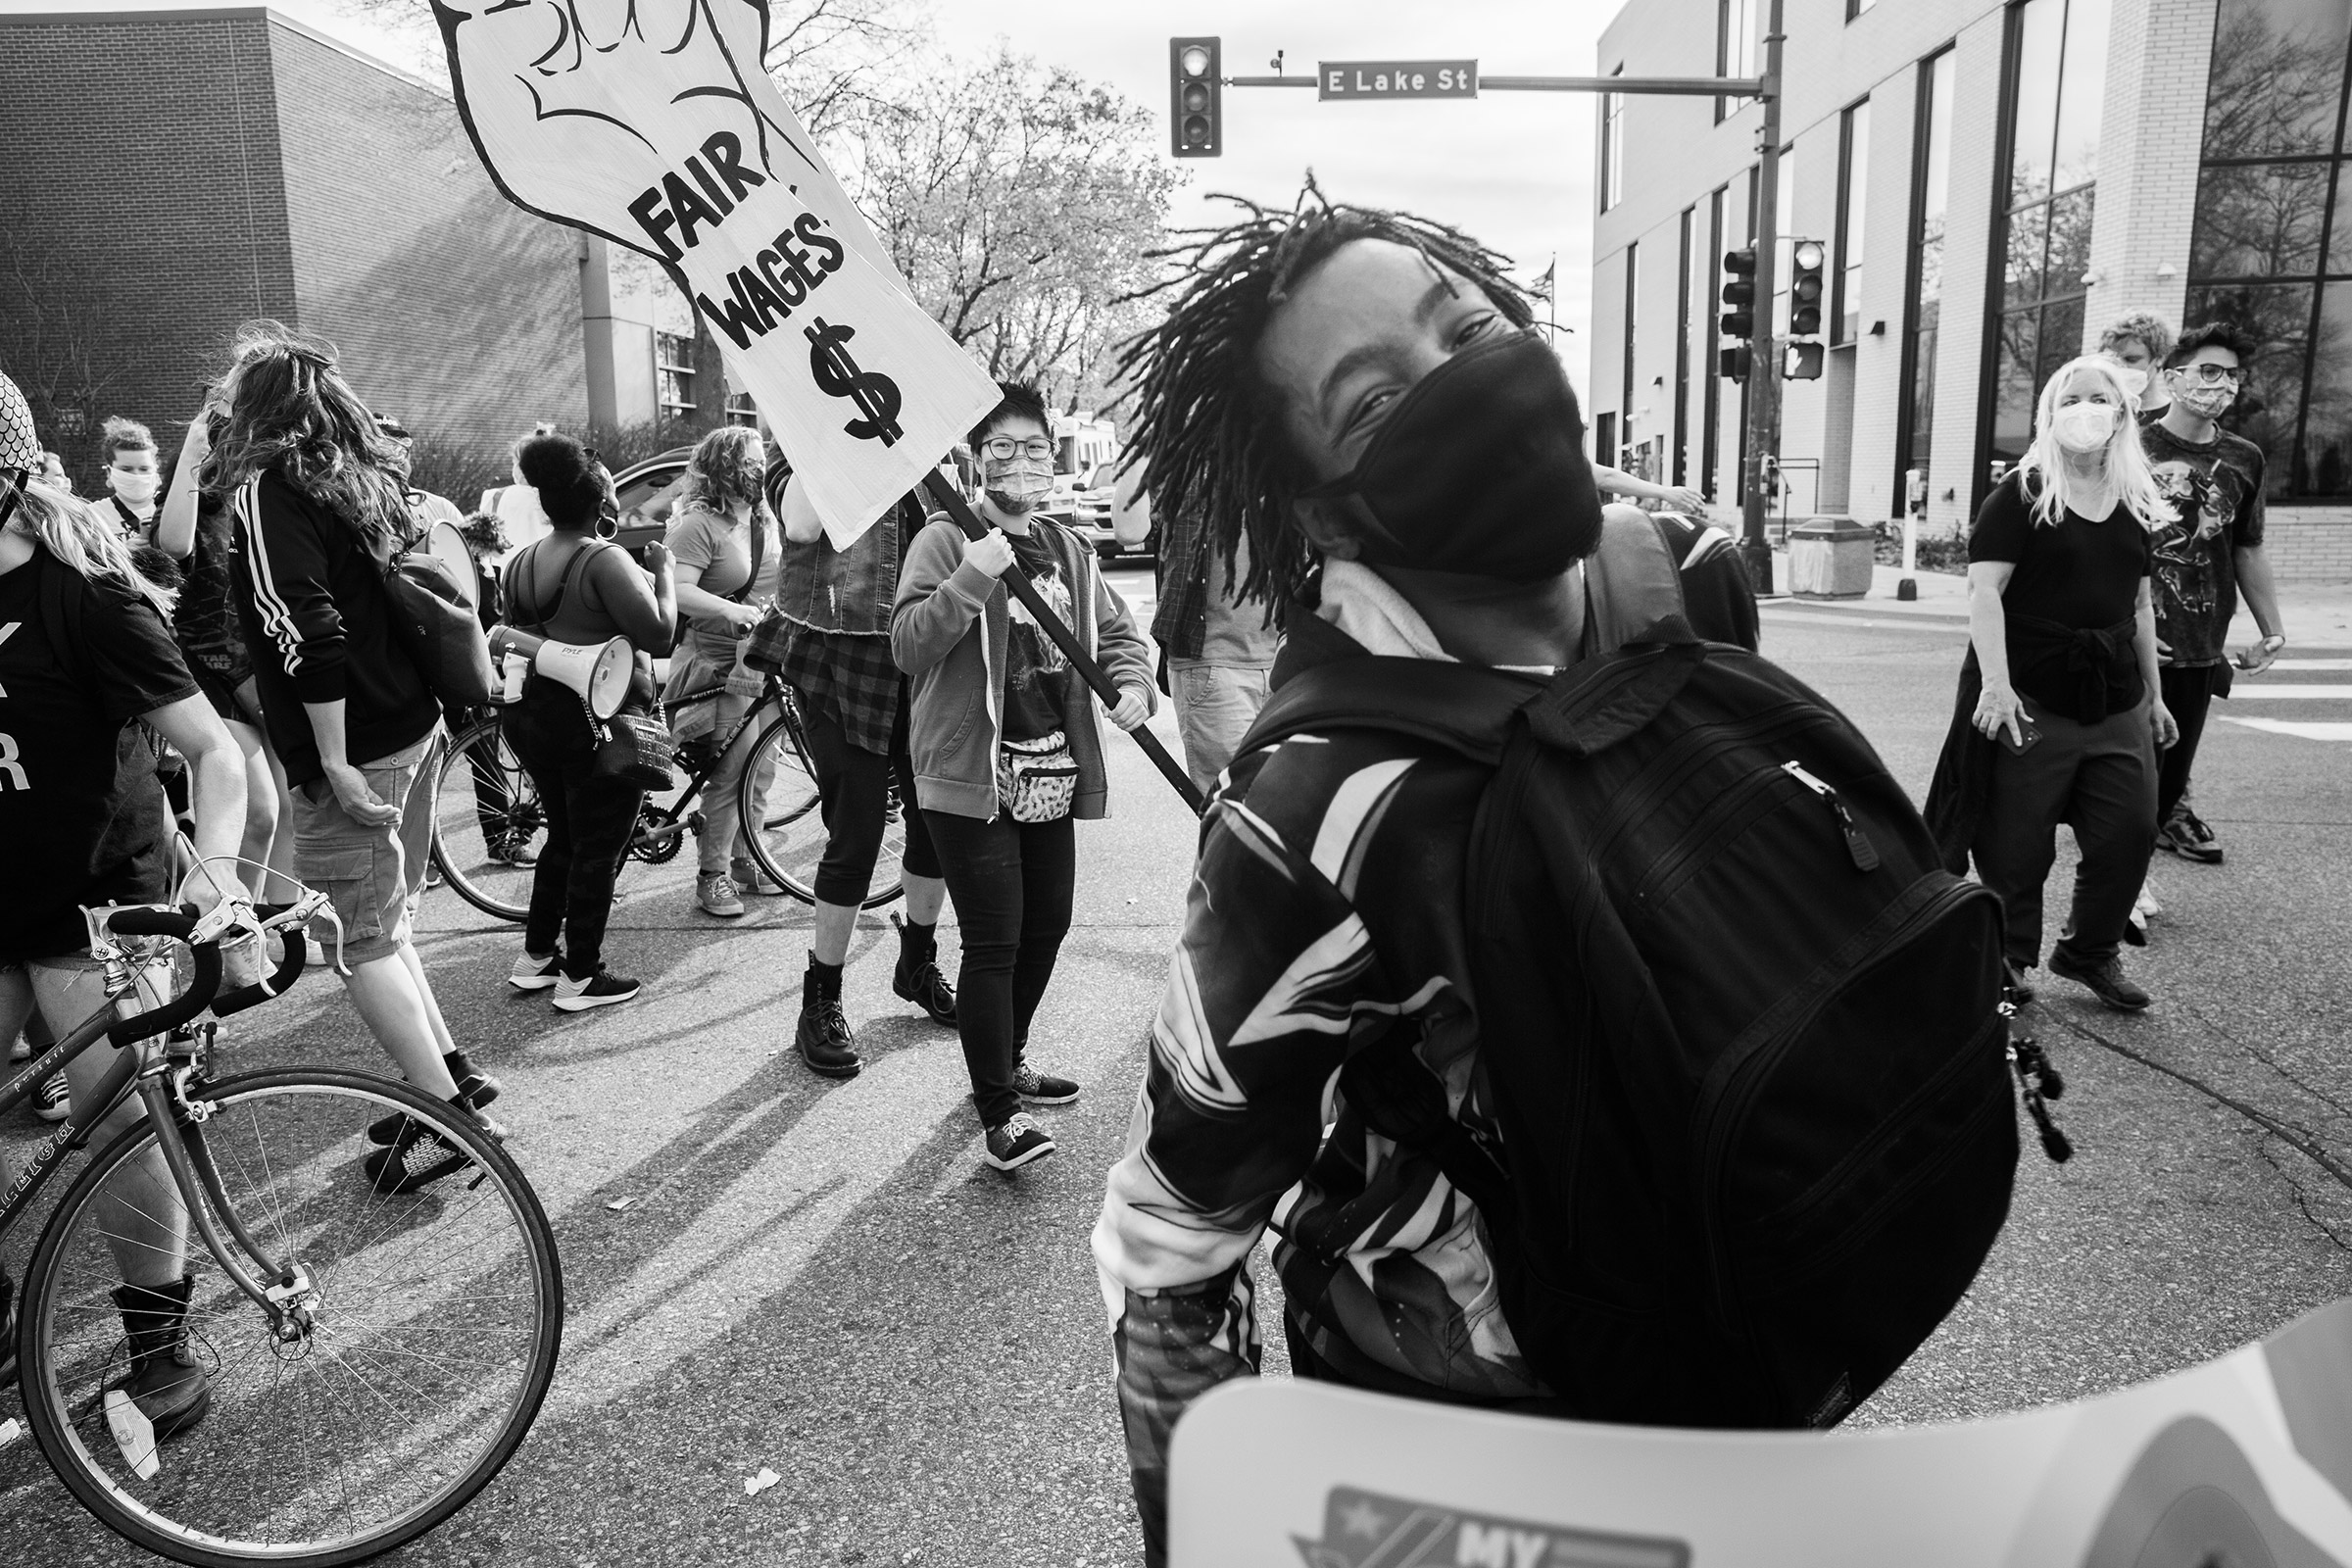 Demonstrators march and dance in South Minneapolis on Nov. 7. (Patience Zalanga for TIME)